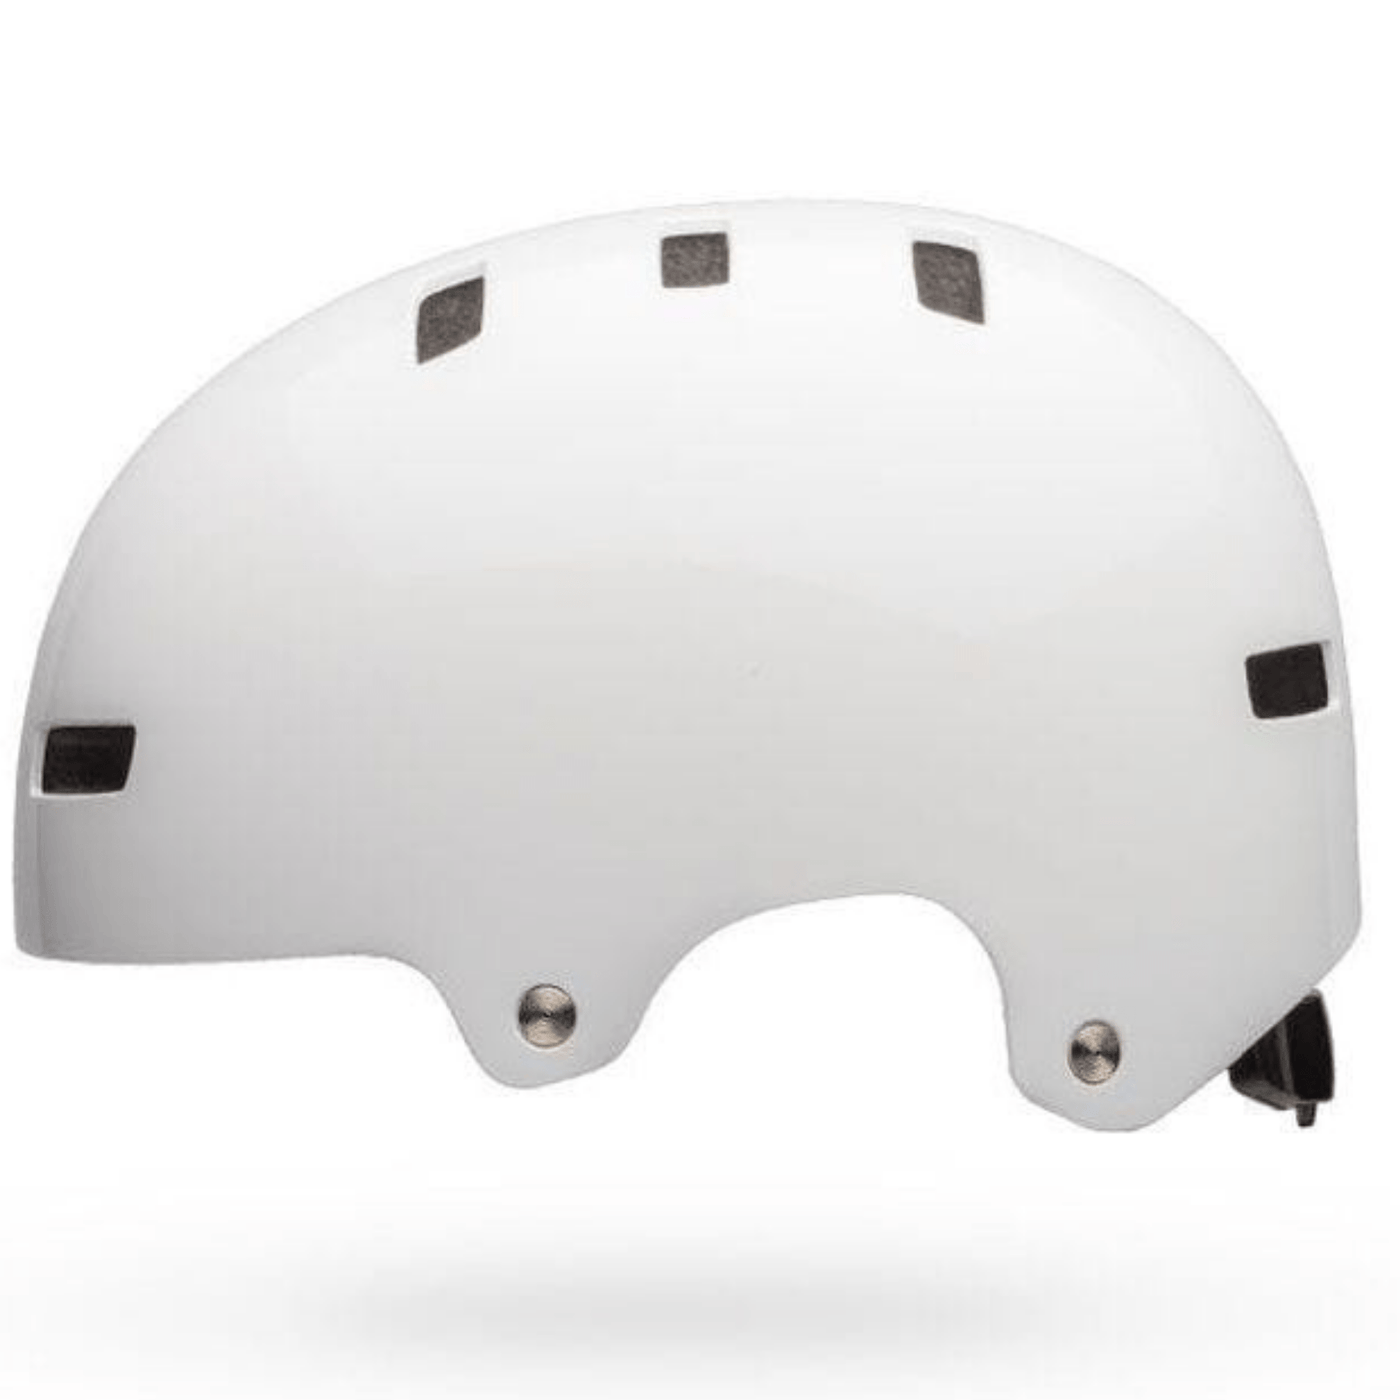 Bell Helmet Local - Gloss White 8Lines Shop - Fast Shipping